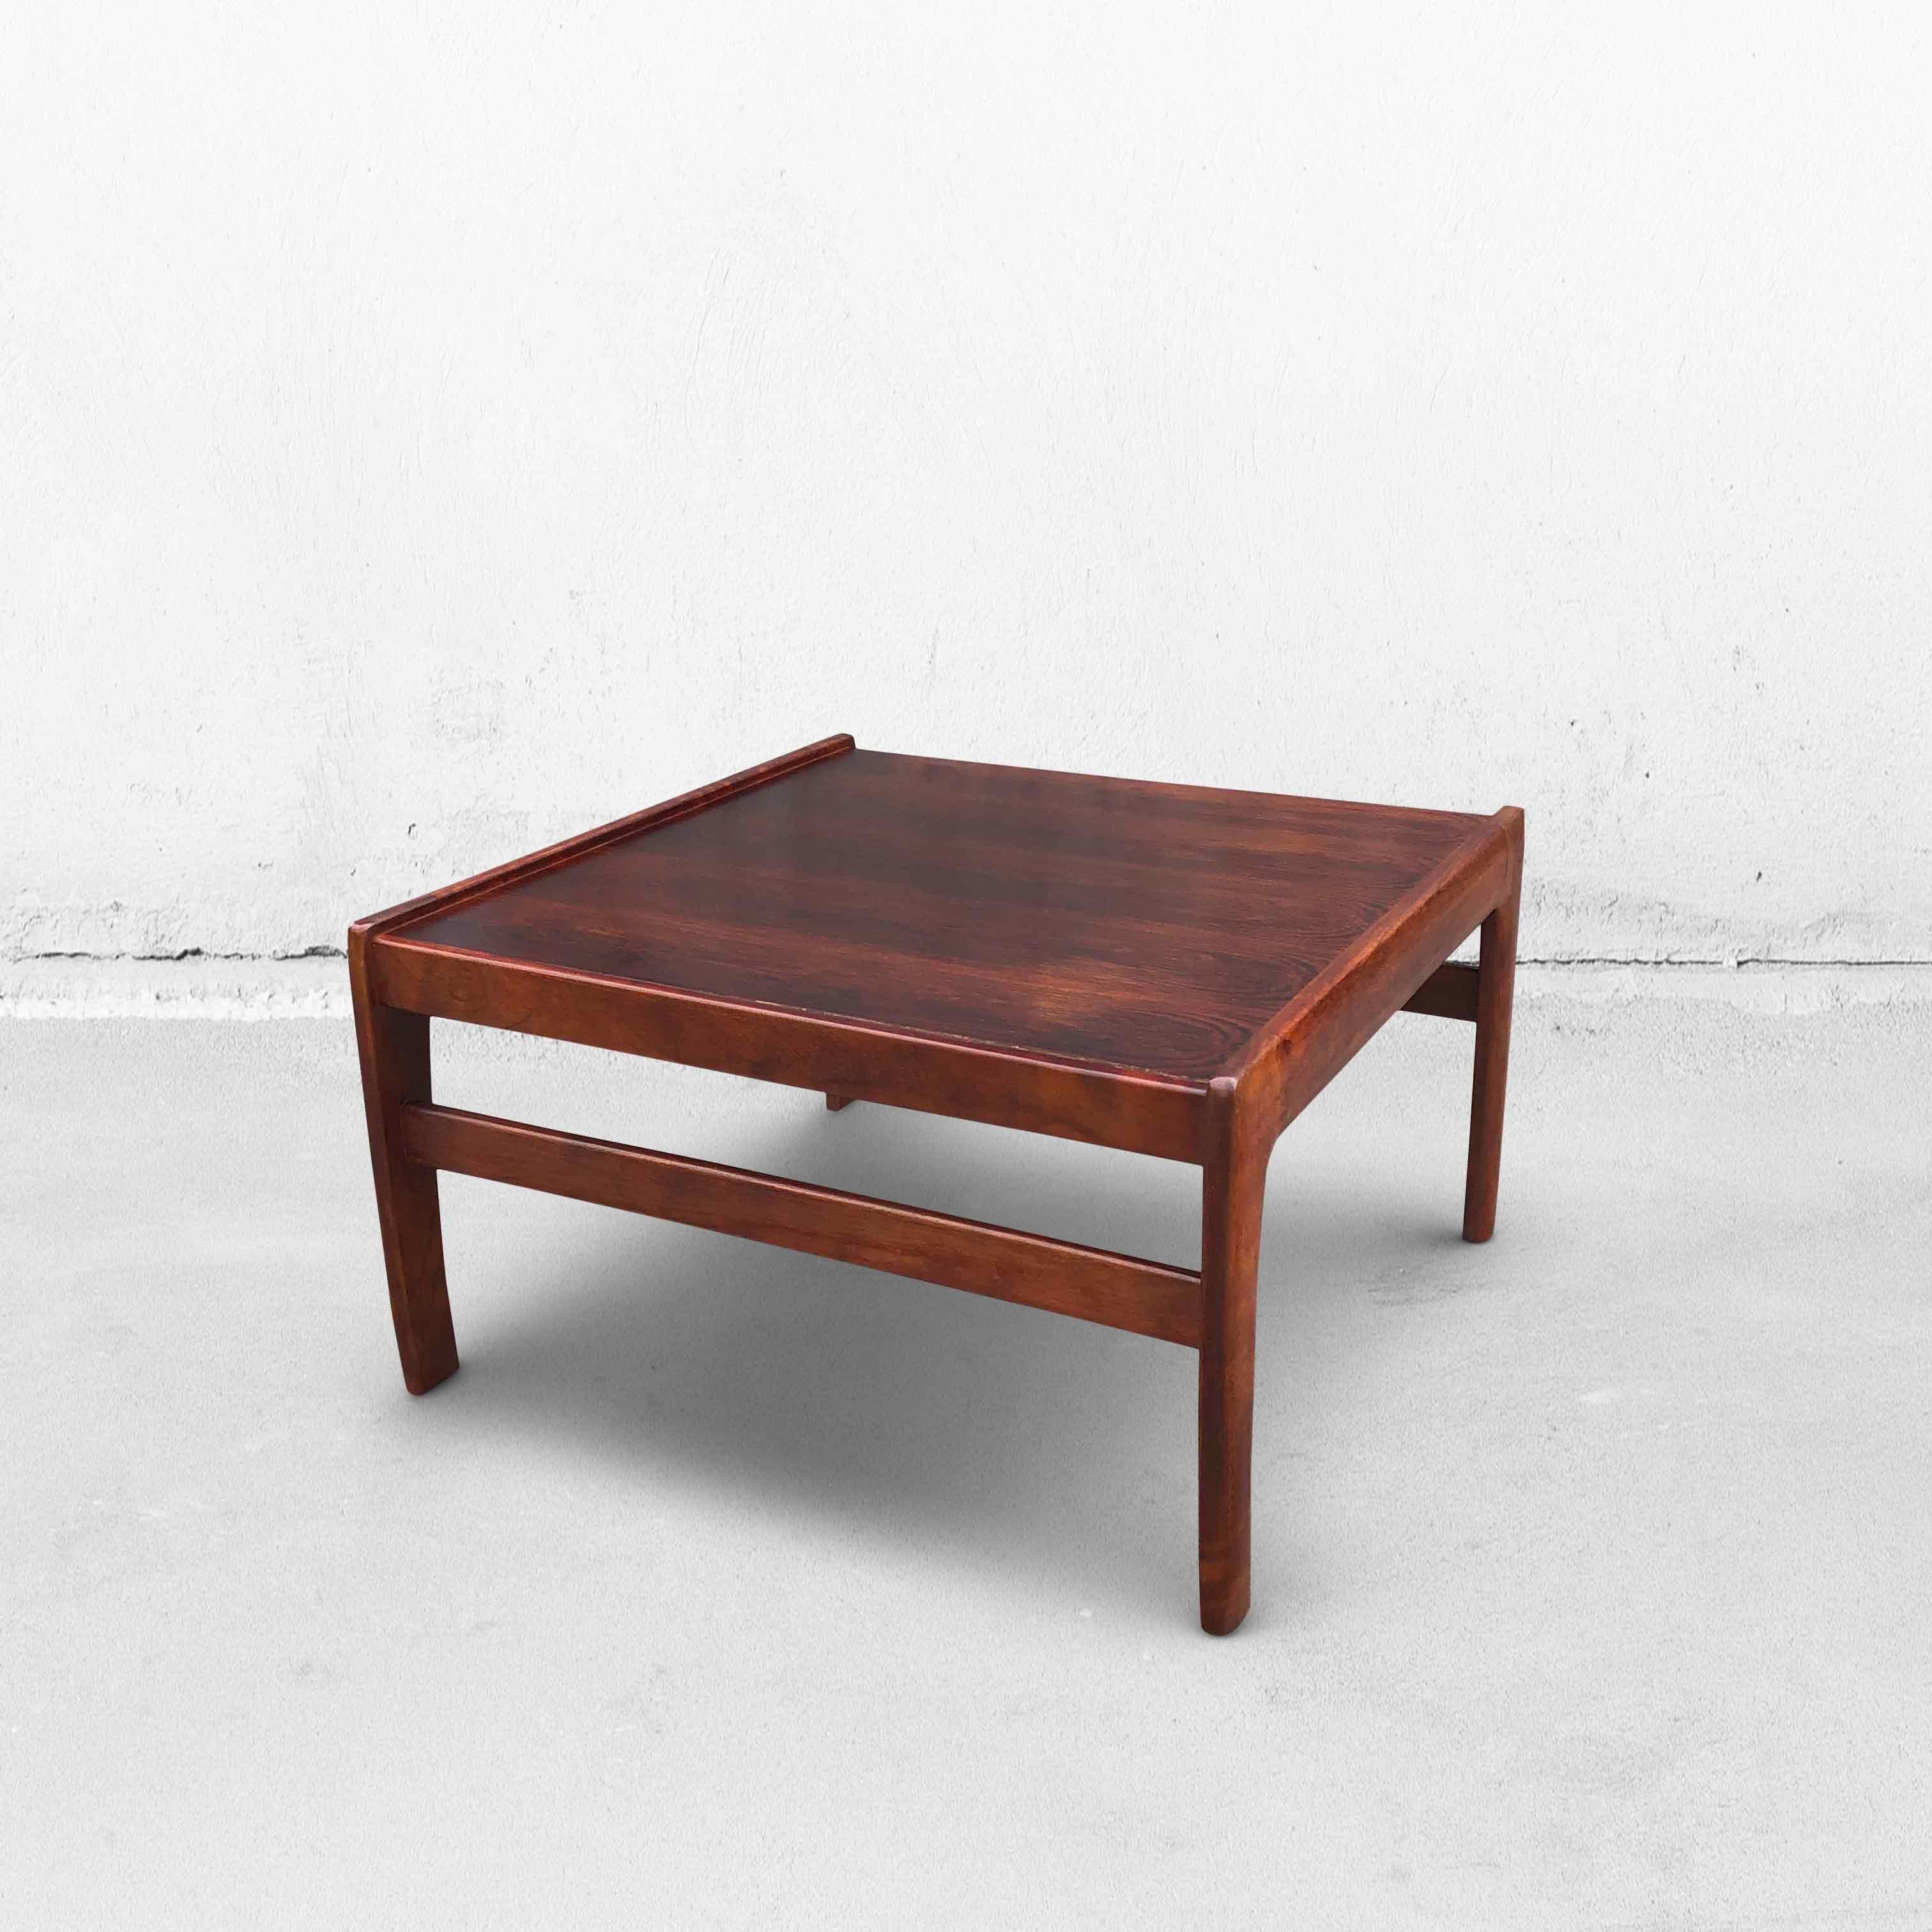 the table is made for rosewood